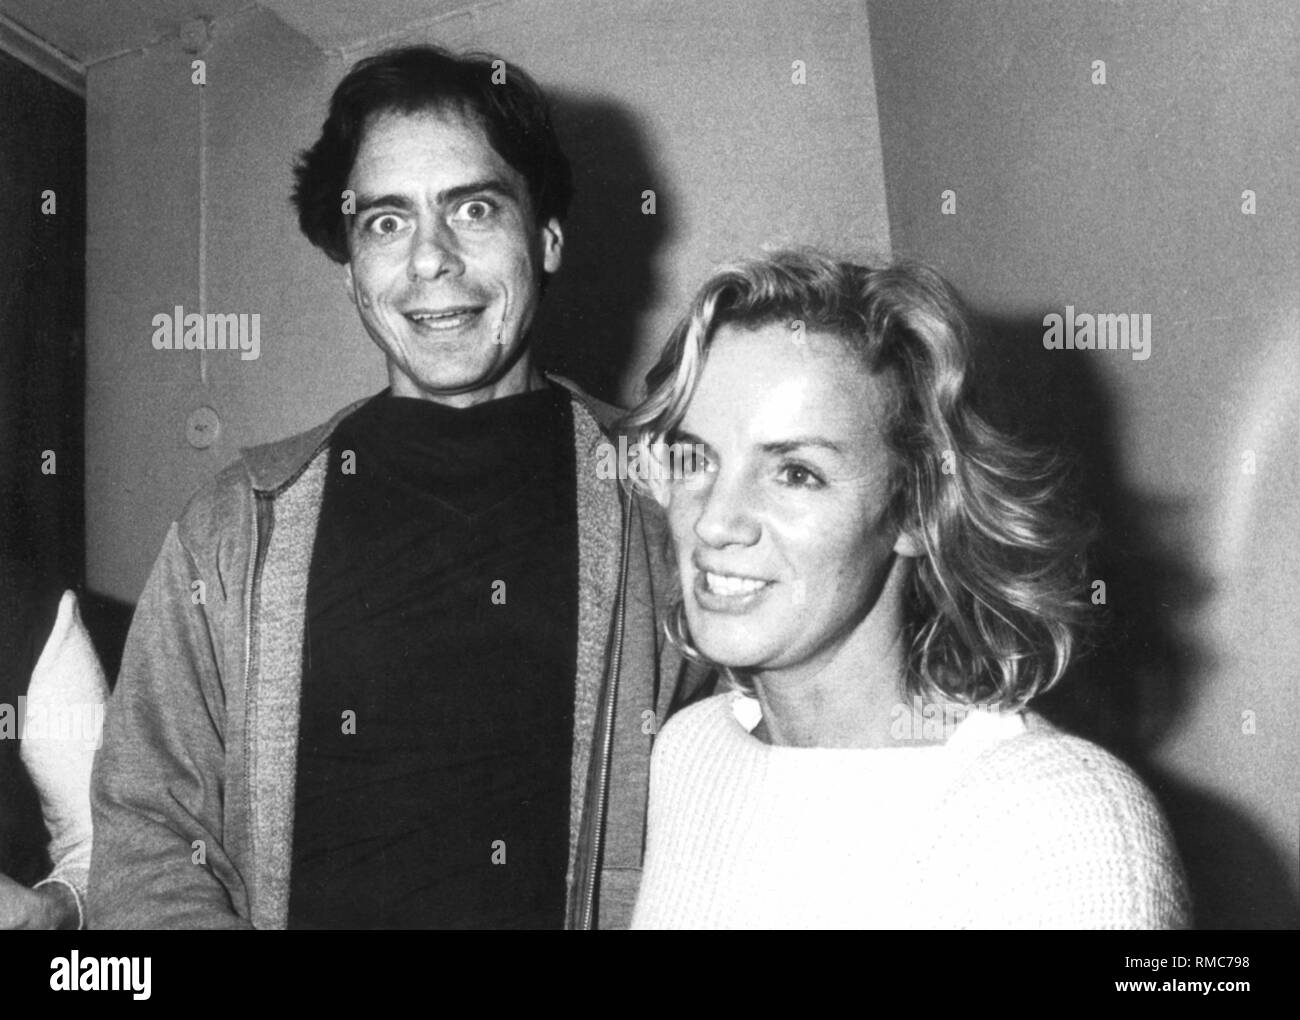 Jil Sander High Resolution Stock Photography and Images - Alamy